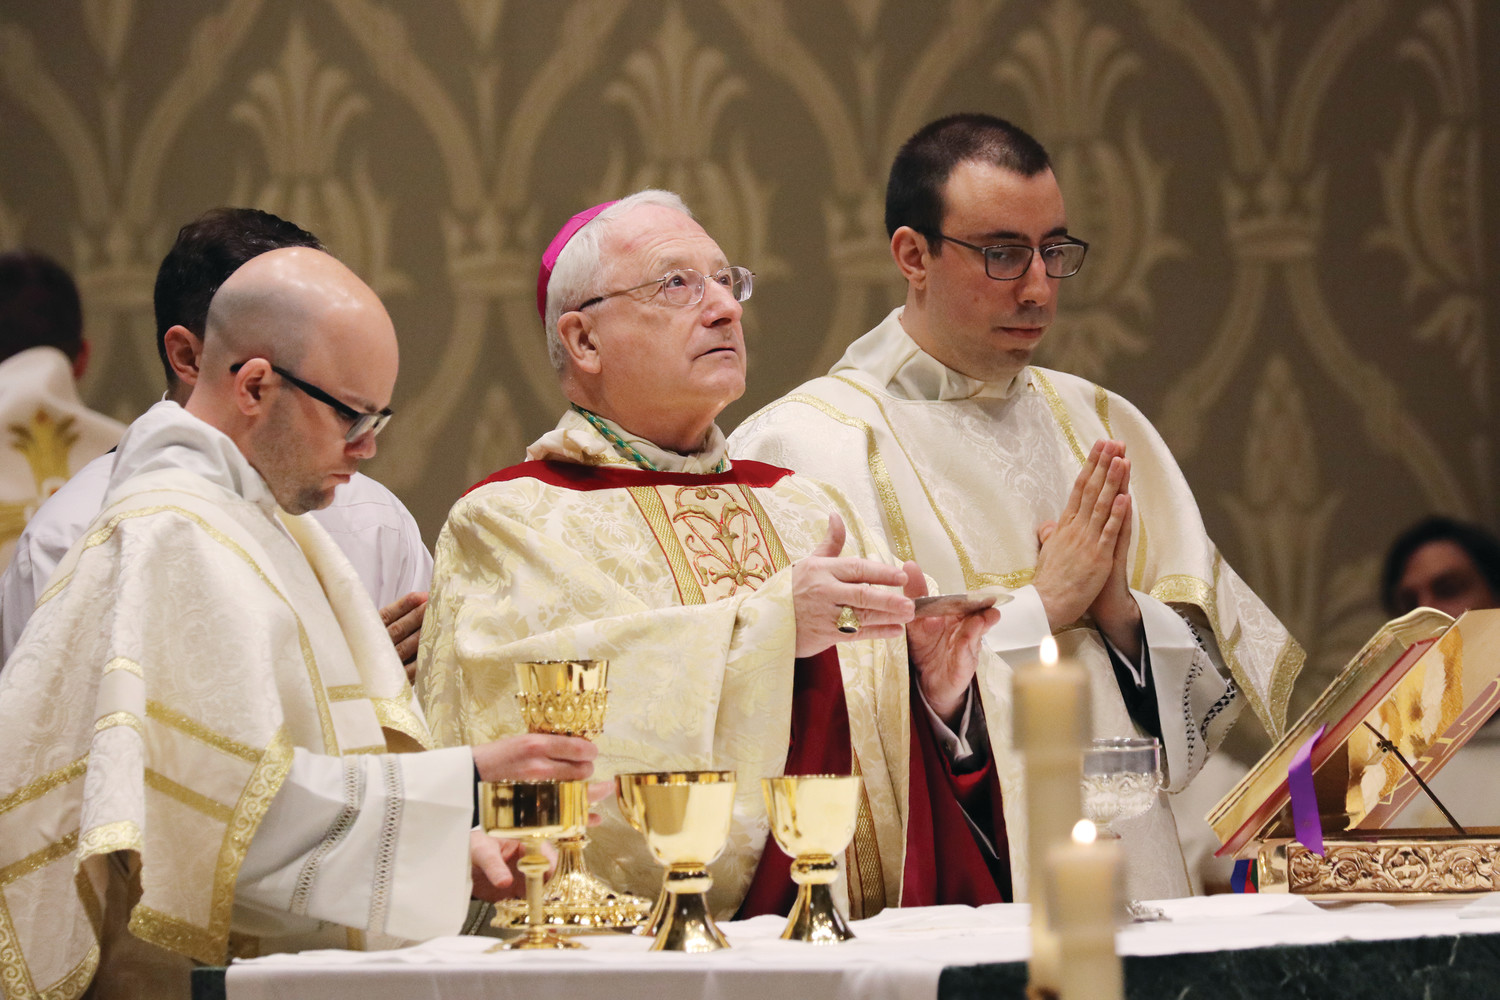 Newly ordained Transitional Deacons Brendan Rowley, left and Eric Silva assist Bishop Robert C. Evans at the altar.